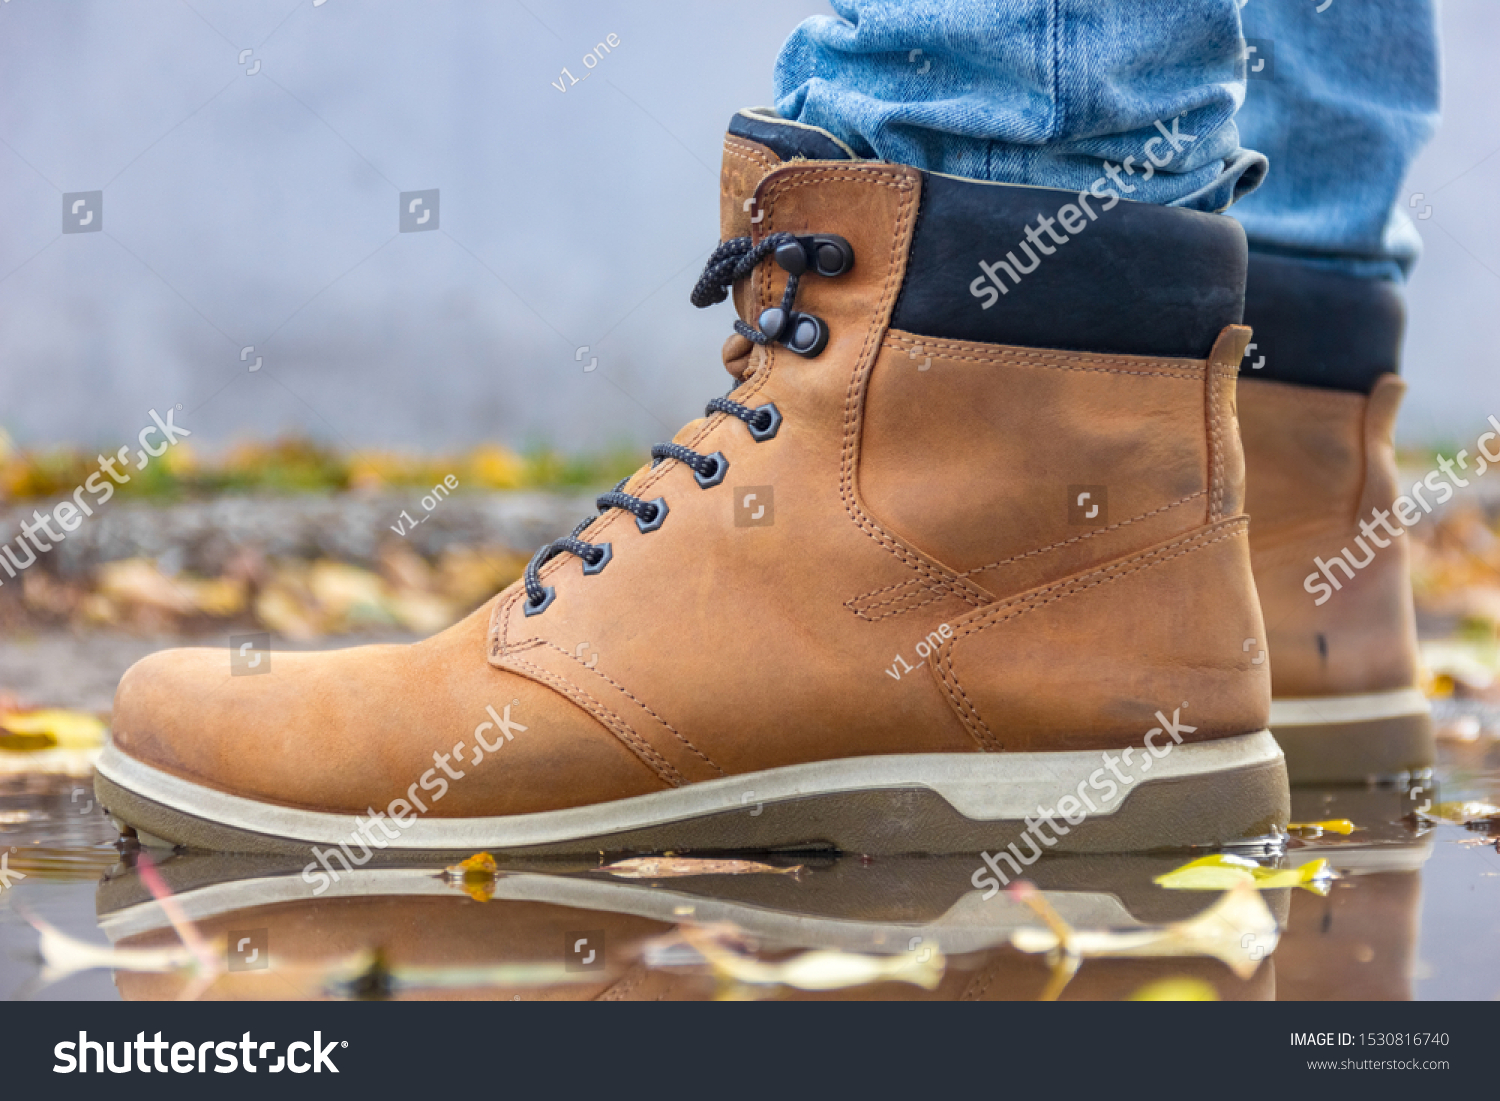 Beautiful leather beige men's high spring-autumn boots. Stylish and fashion casual shoes in autumn weather in the puddle water close-up #1530816740